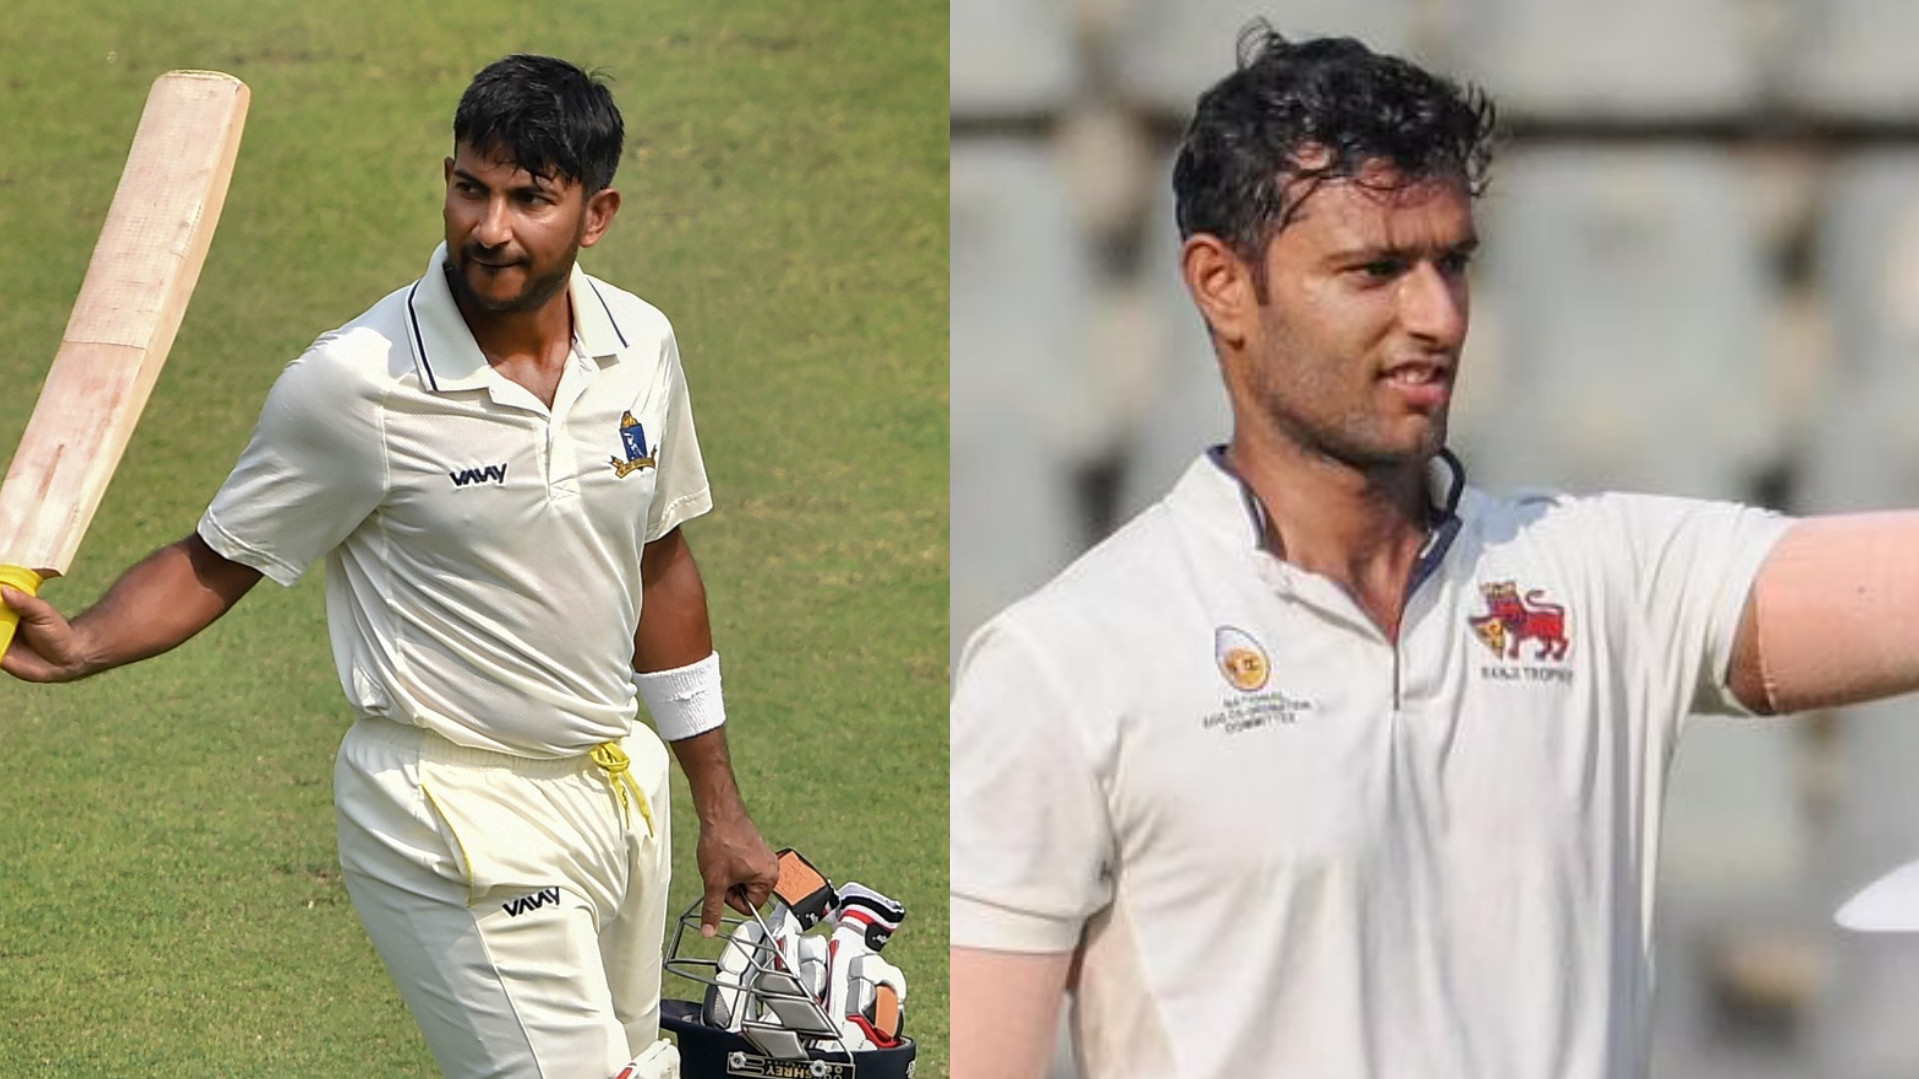 Ranji Trophy 2022: Mumbai and Bengal hit by COVID-19 ahead of their warmup game